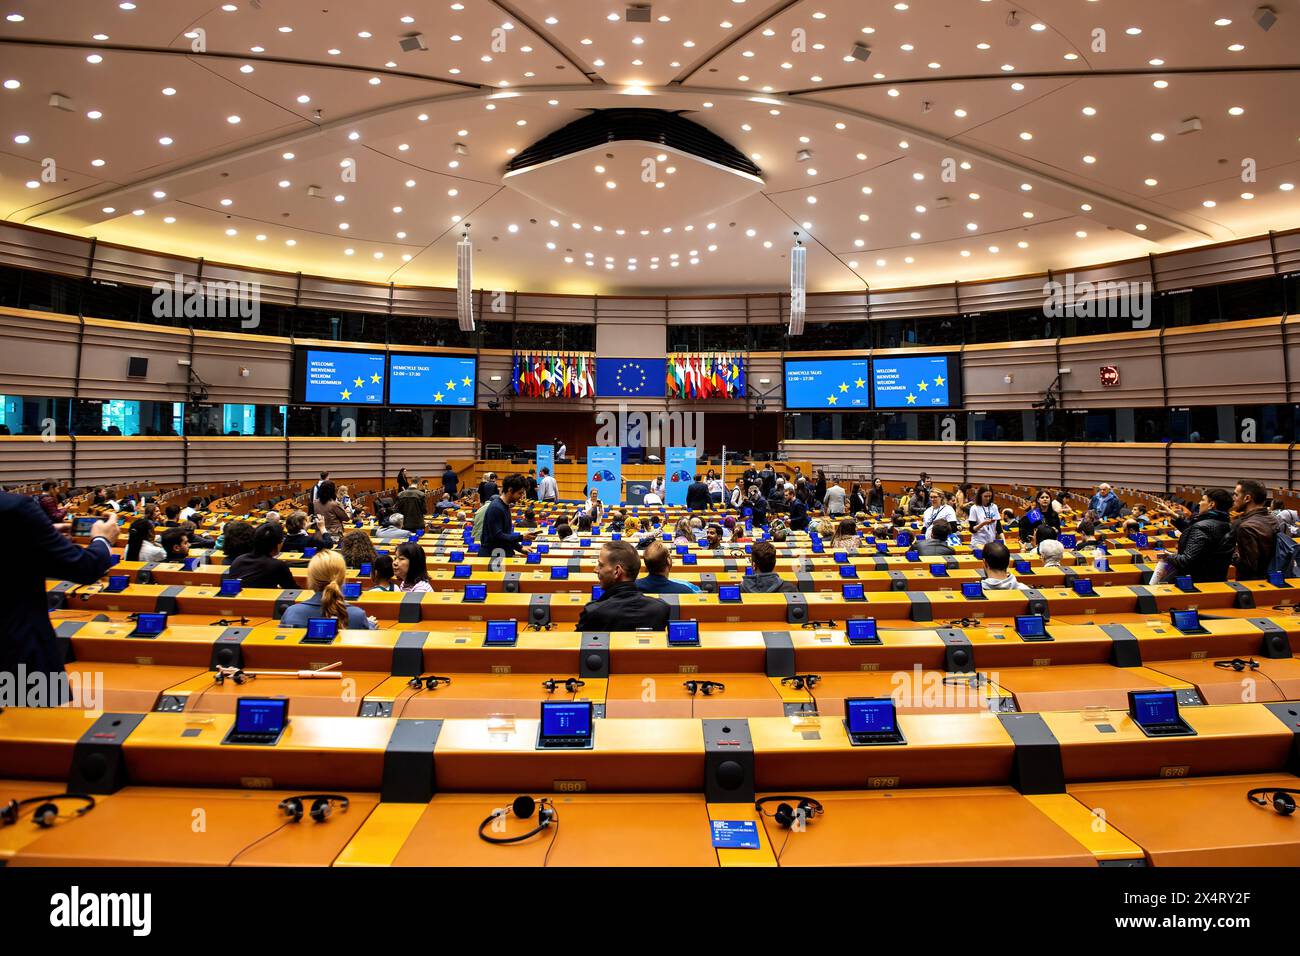 The public get to walk around and sit in the EU parliament chamber during an open day to celebrate the birthday of the European Parliament in Brussels. Celebrating the European Parliament's birthday in Brussels, visitors gained special access to the Parliament chambers and the iconic building itself. The open day featured informative stands on the upcoming European Parliament elections, fostering political engagement and dialogue. Against the backdrop of European democracy, attendees immersed themselves in the legislative process, symbolizing transparency and civic participation. The event sh Stock Photo